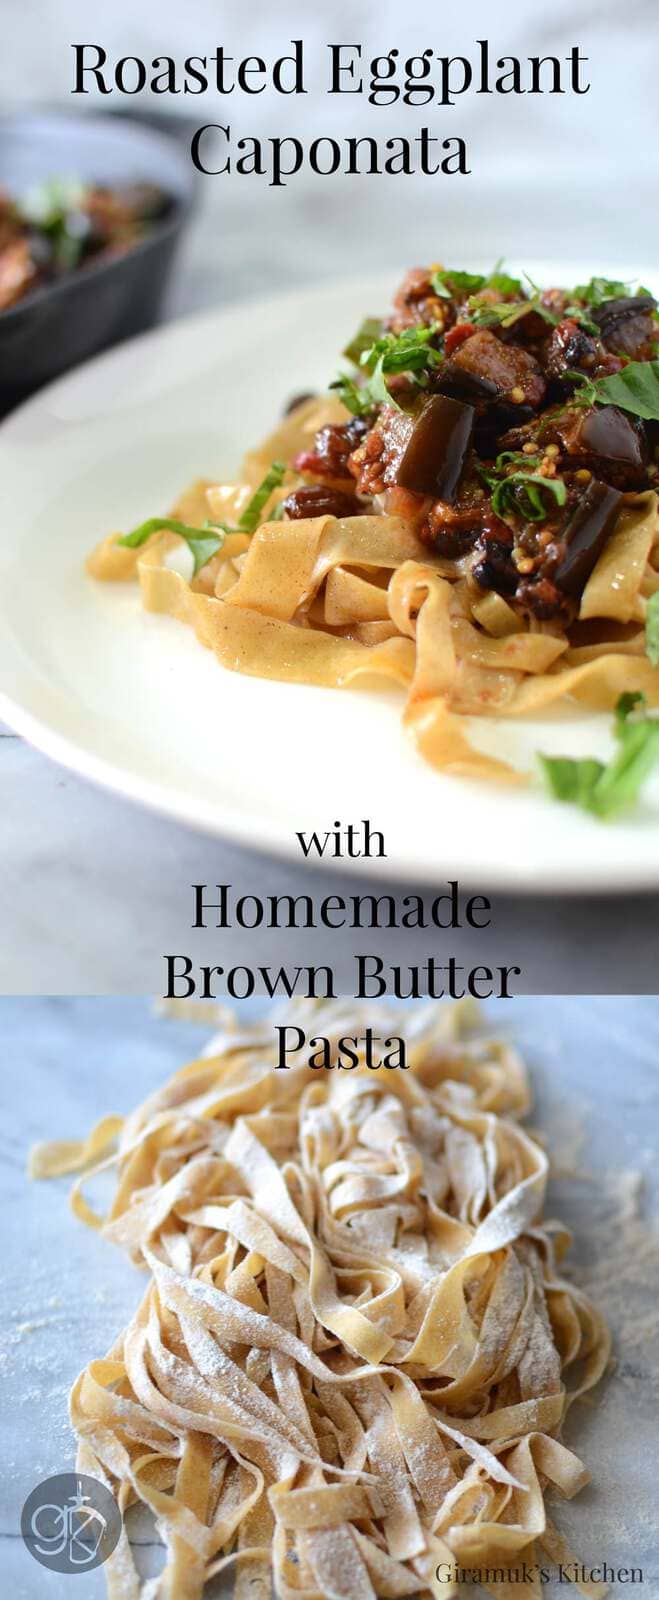 Roasted Eggplant Caponata with Brown Butter Pasta